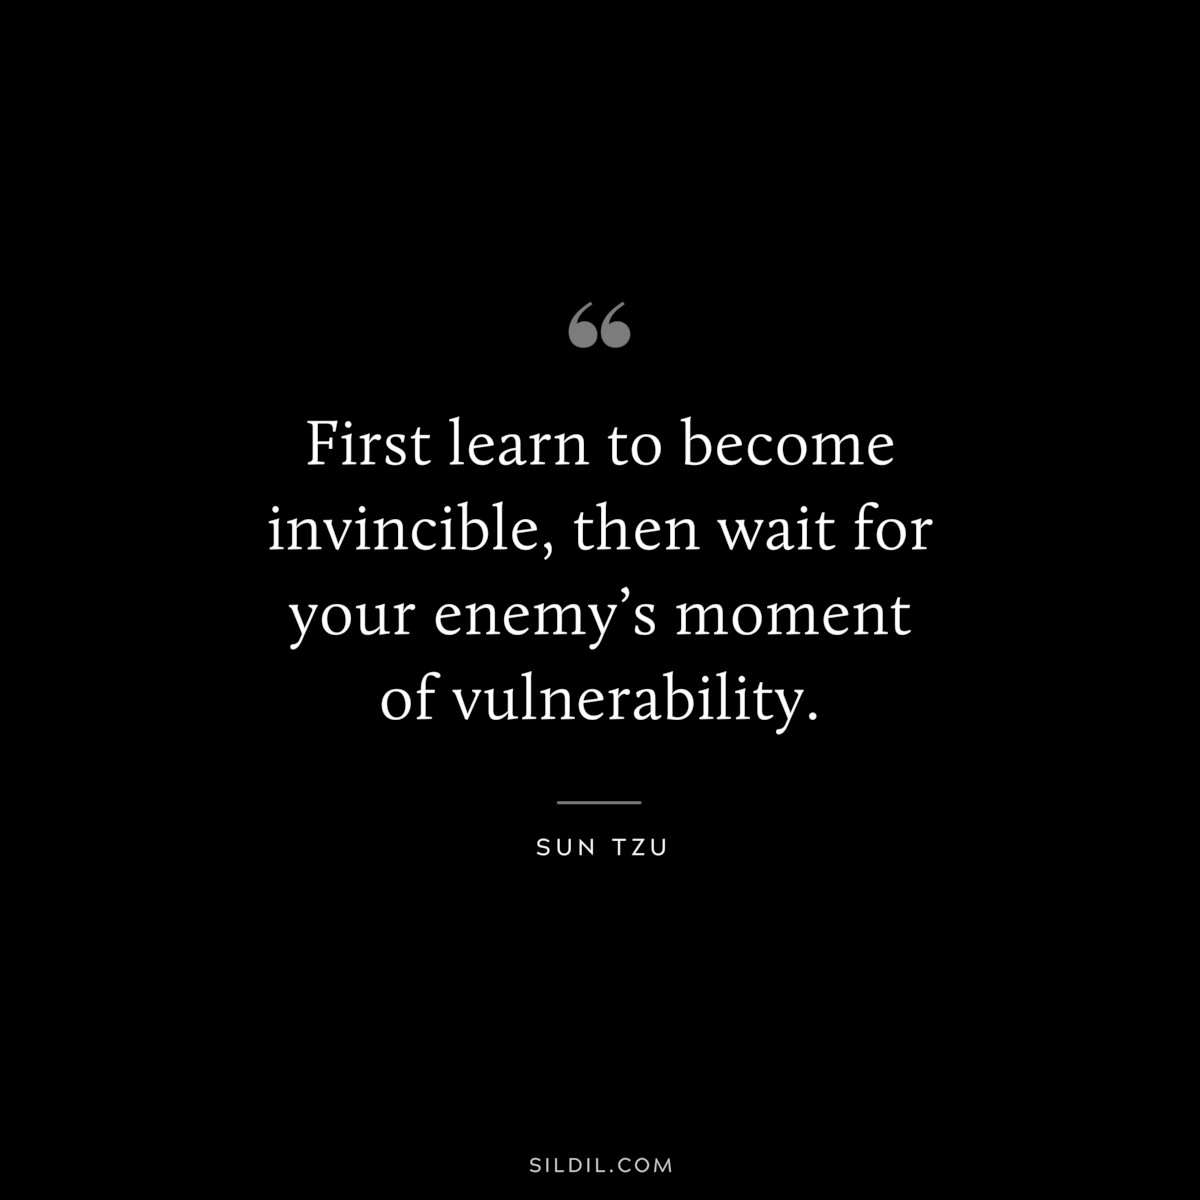 First learn to become invincible, then wait for your enemy’s moment of vulnerability.― Sun Tzu